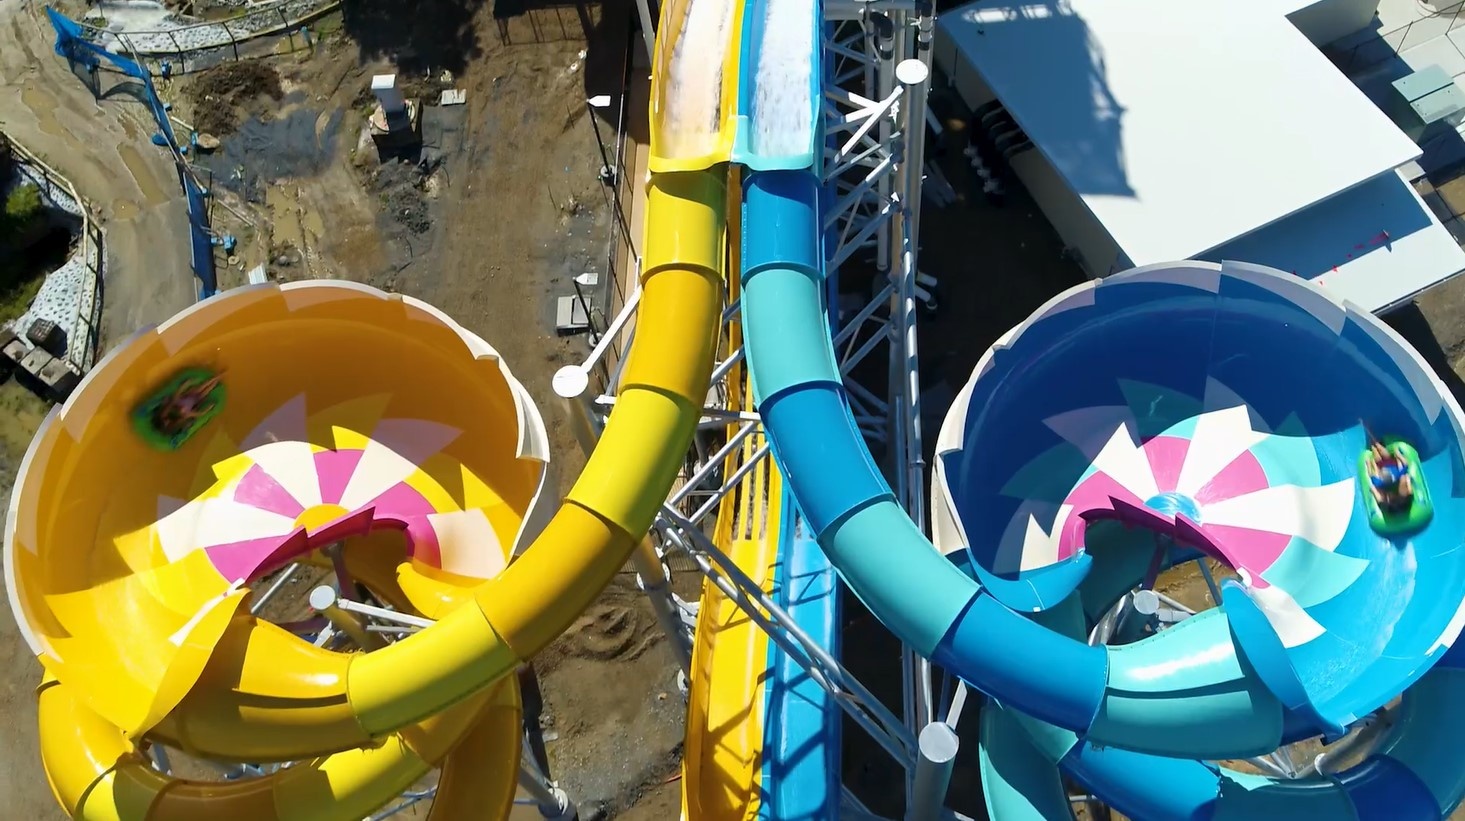 Two mirroring water slides, one yellow, one blue